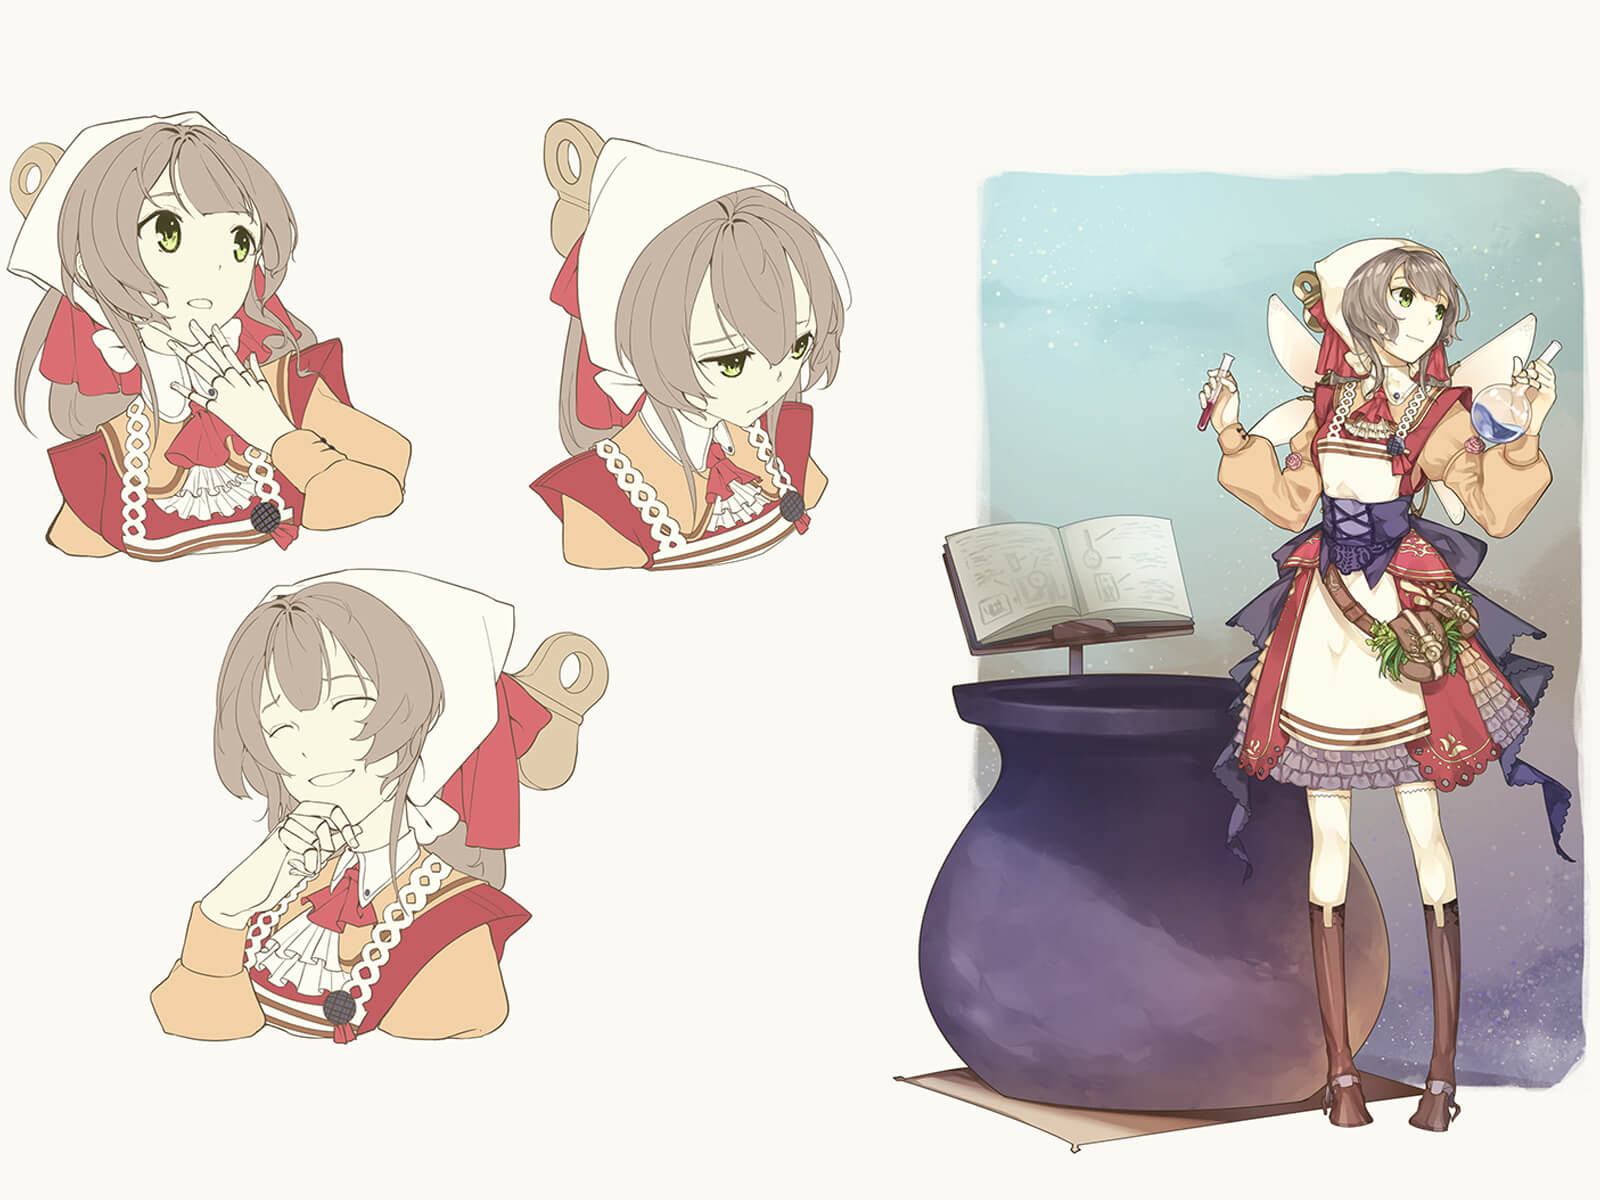 Character sketches of a young woman in red-white-and-blue country-style garb holding an ornate magical staff.